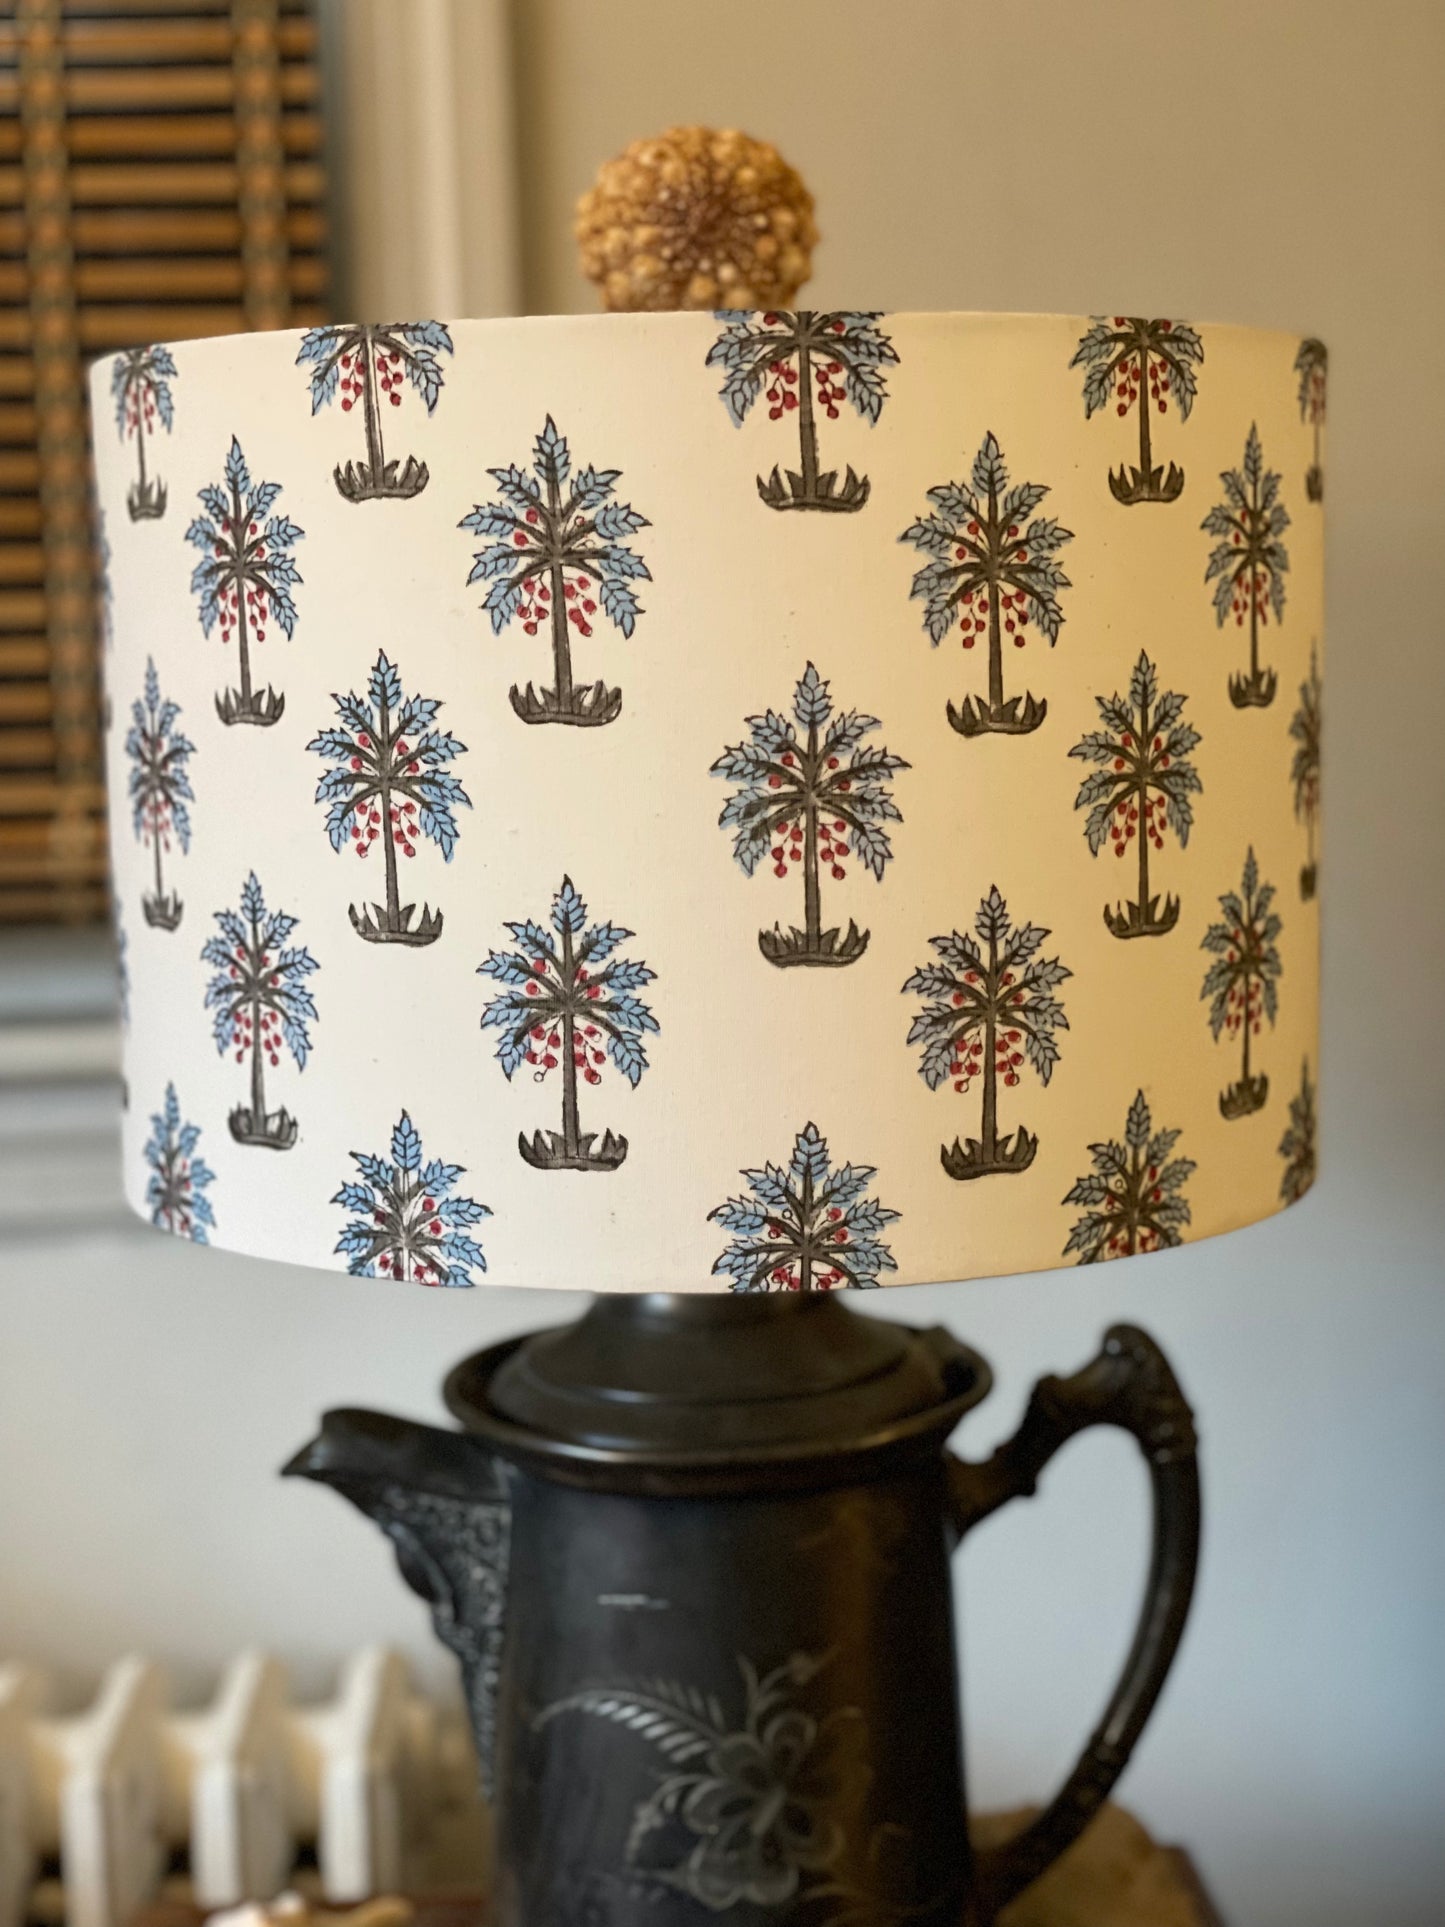 12 Inch Drum Shade. Indian Block print from Jaipur. Grey-Blue Tree with Red Fruit Motif on Eggshell White.